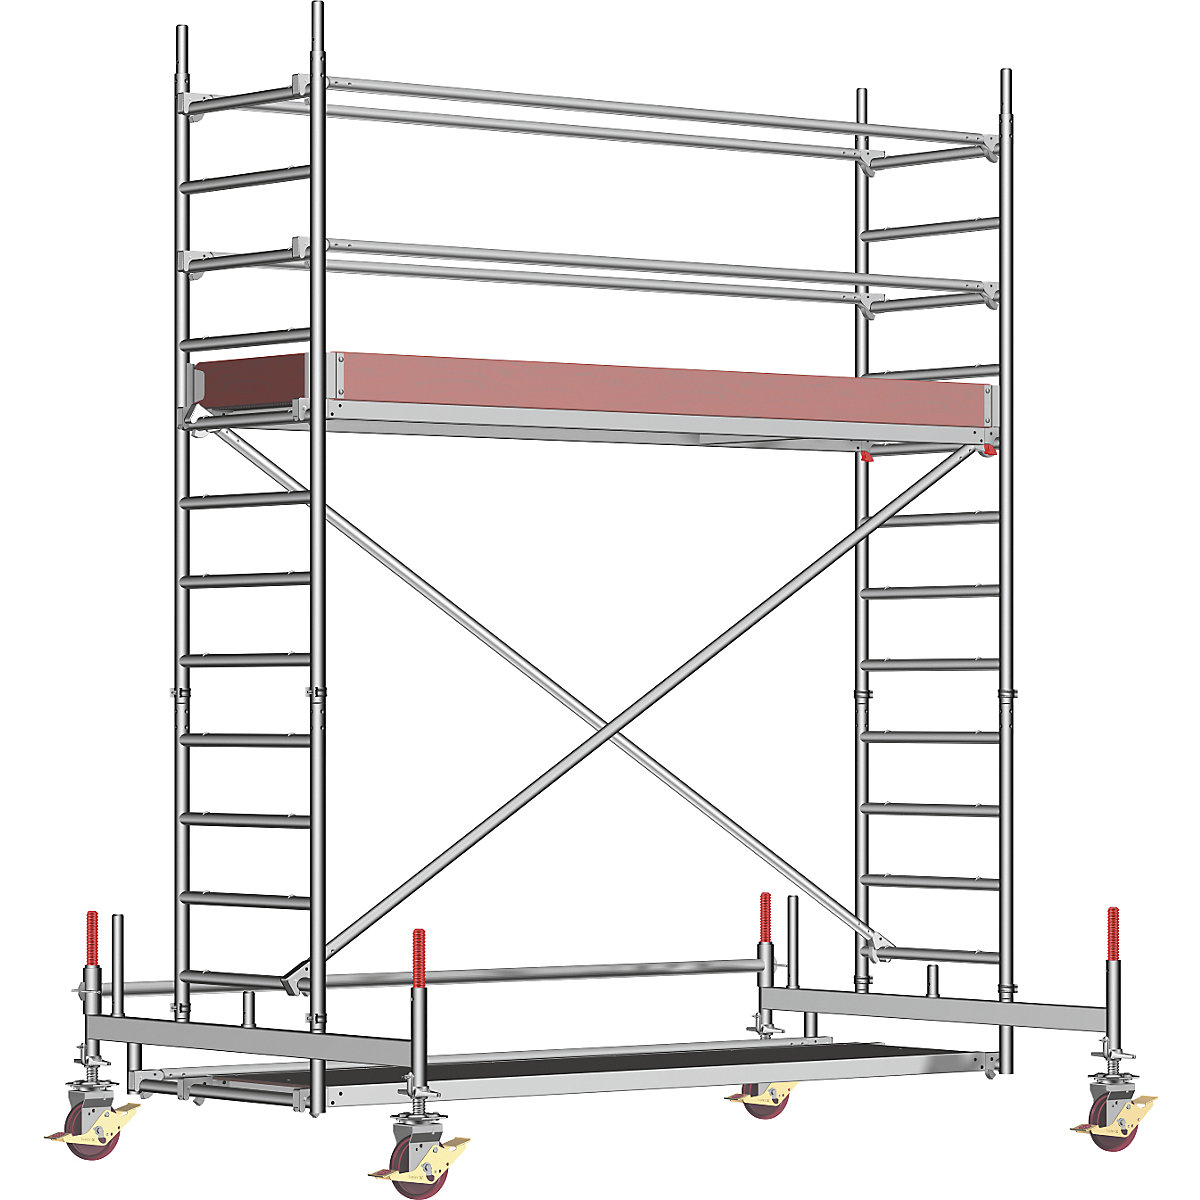 Universal mobile access tower – Layher, standard model, scaffolding height 3.58 m-9